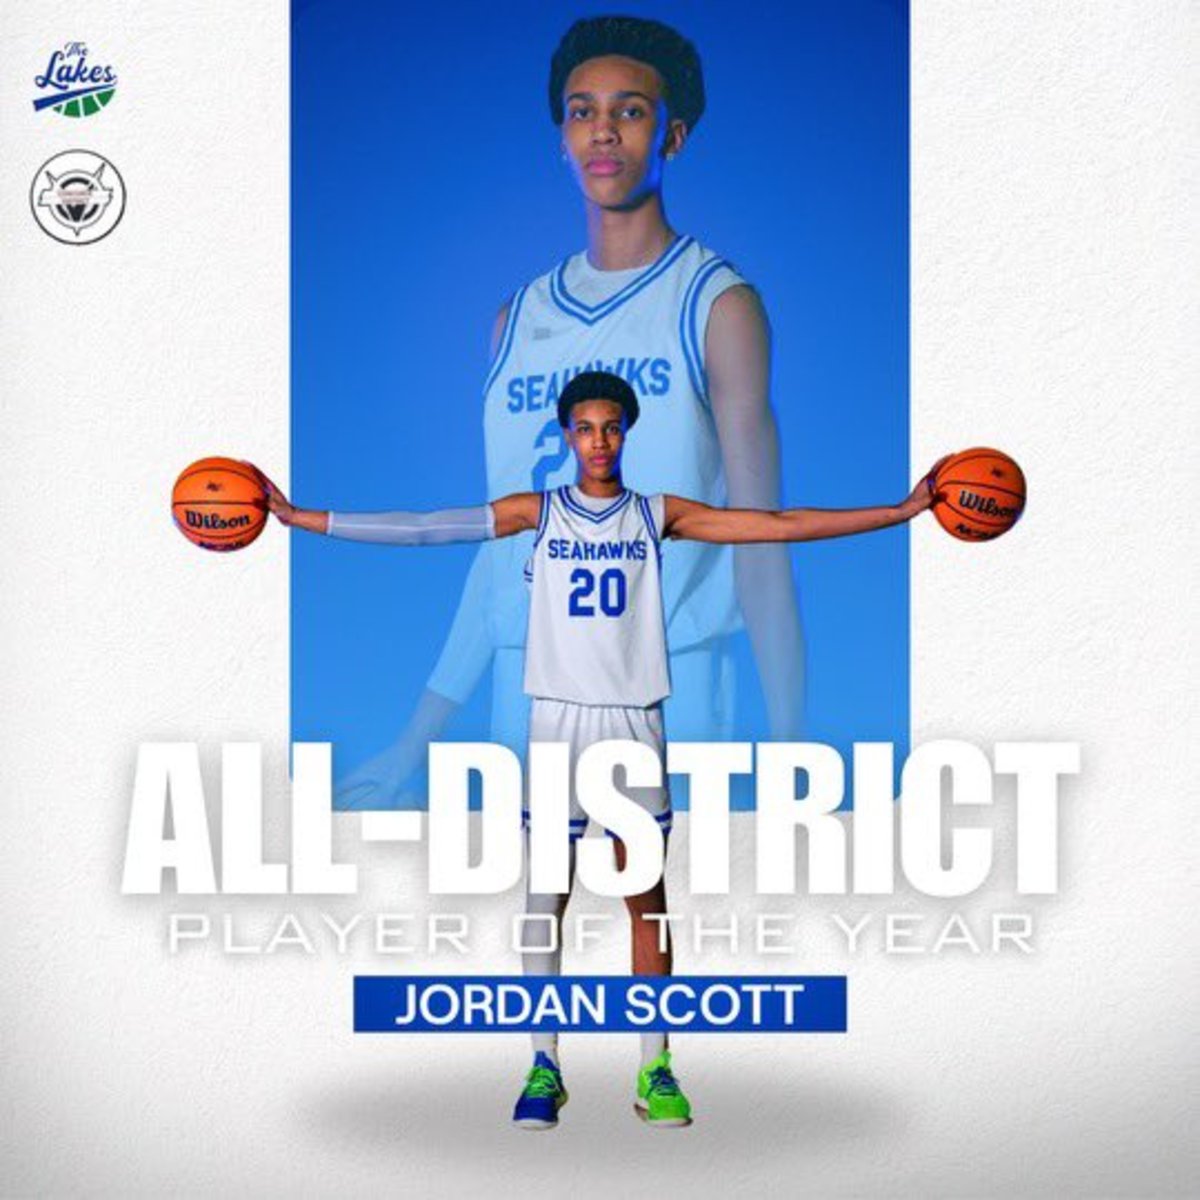 Jordan Scott was named All-District Player of the Year at South Lakes High School.